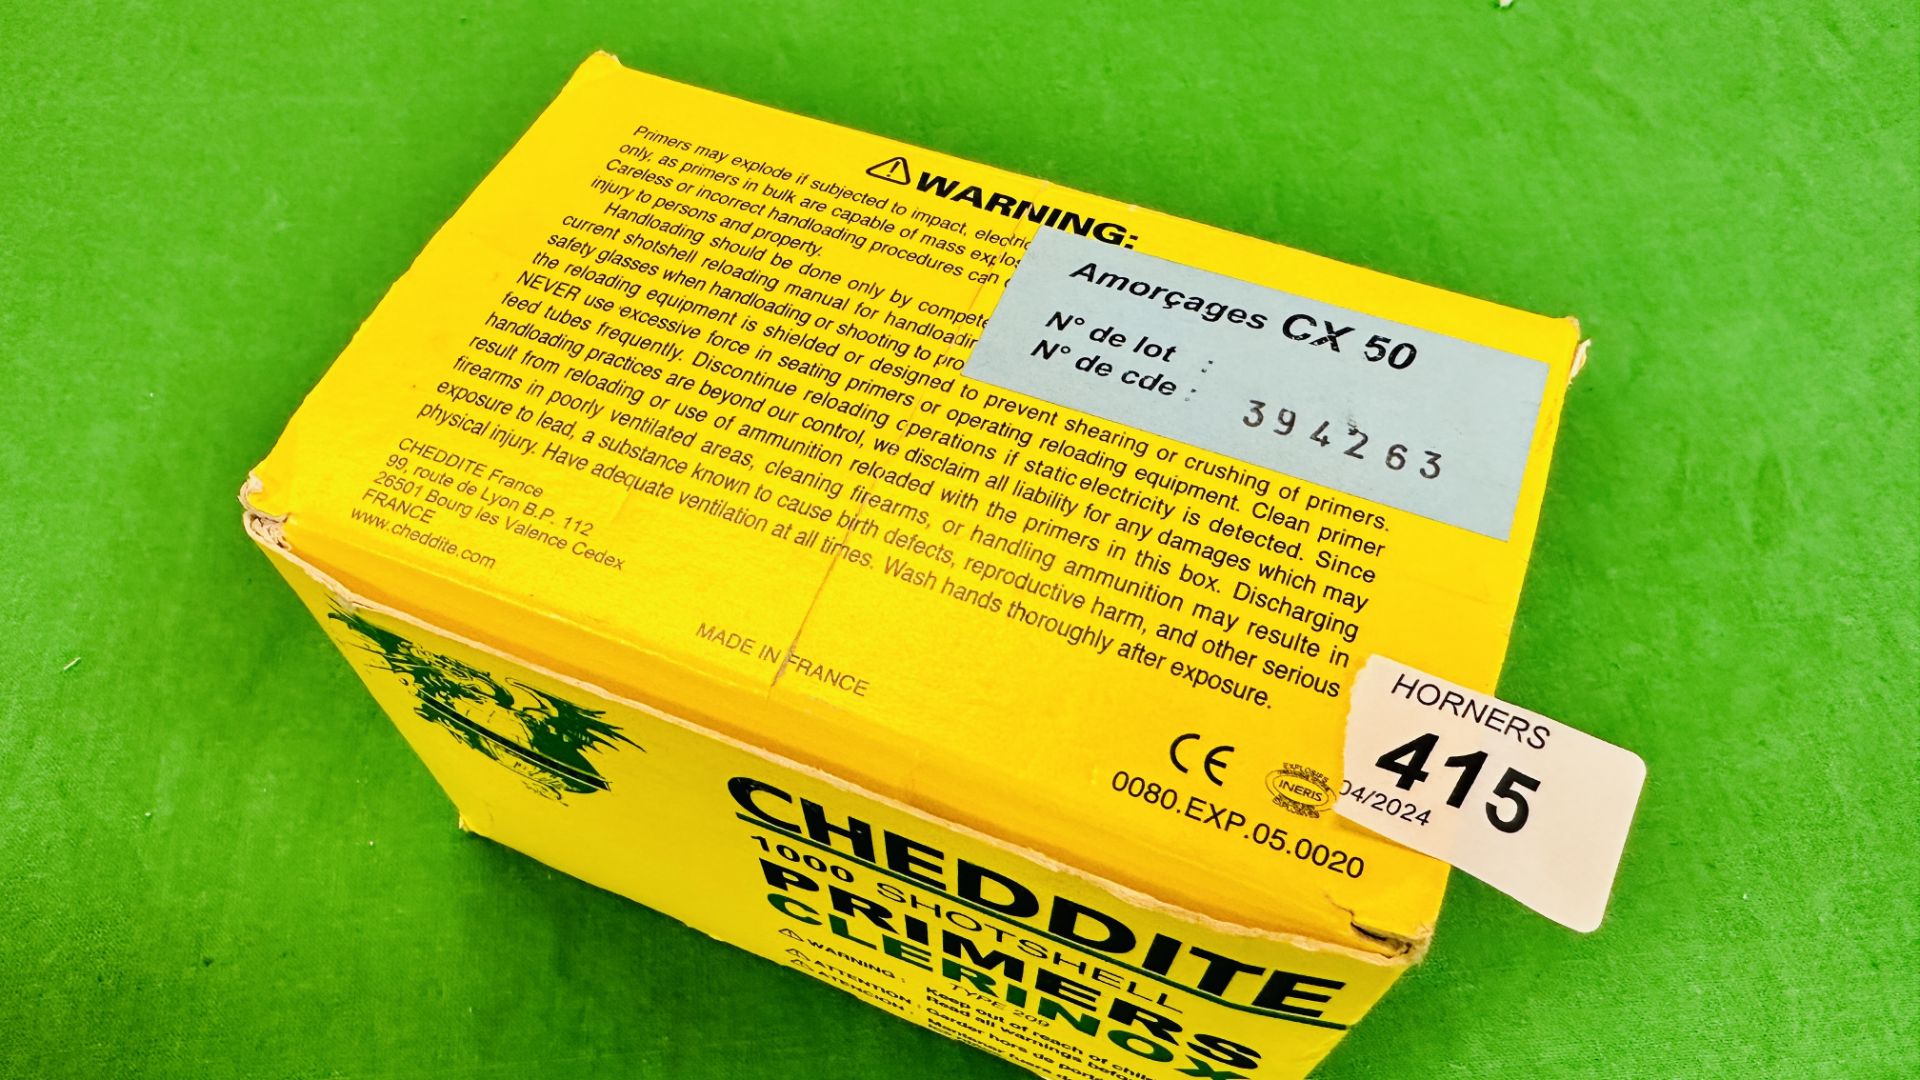 1000 CHEDDITE CLERINOX 209 PRIMERS - (TO BE COLLECTED IN PERSON BY LICENCE HOLDER ONLY - NO POSTAGE - Image 2 of 5